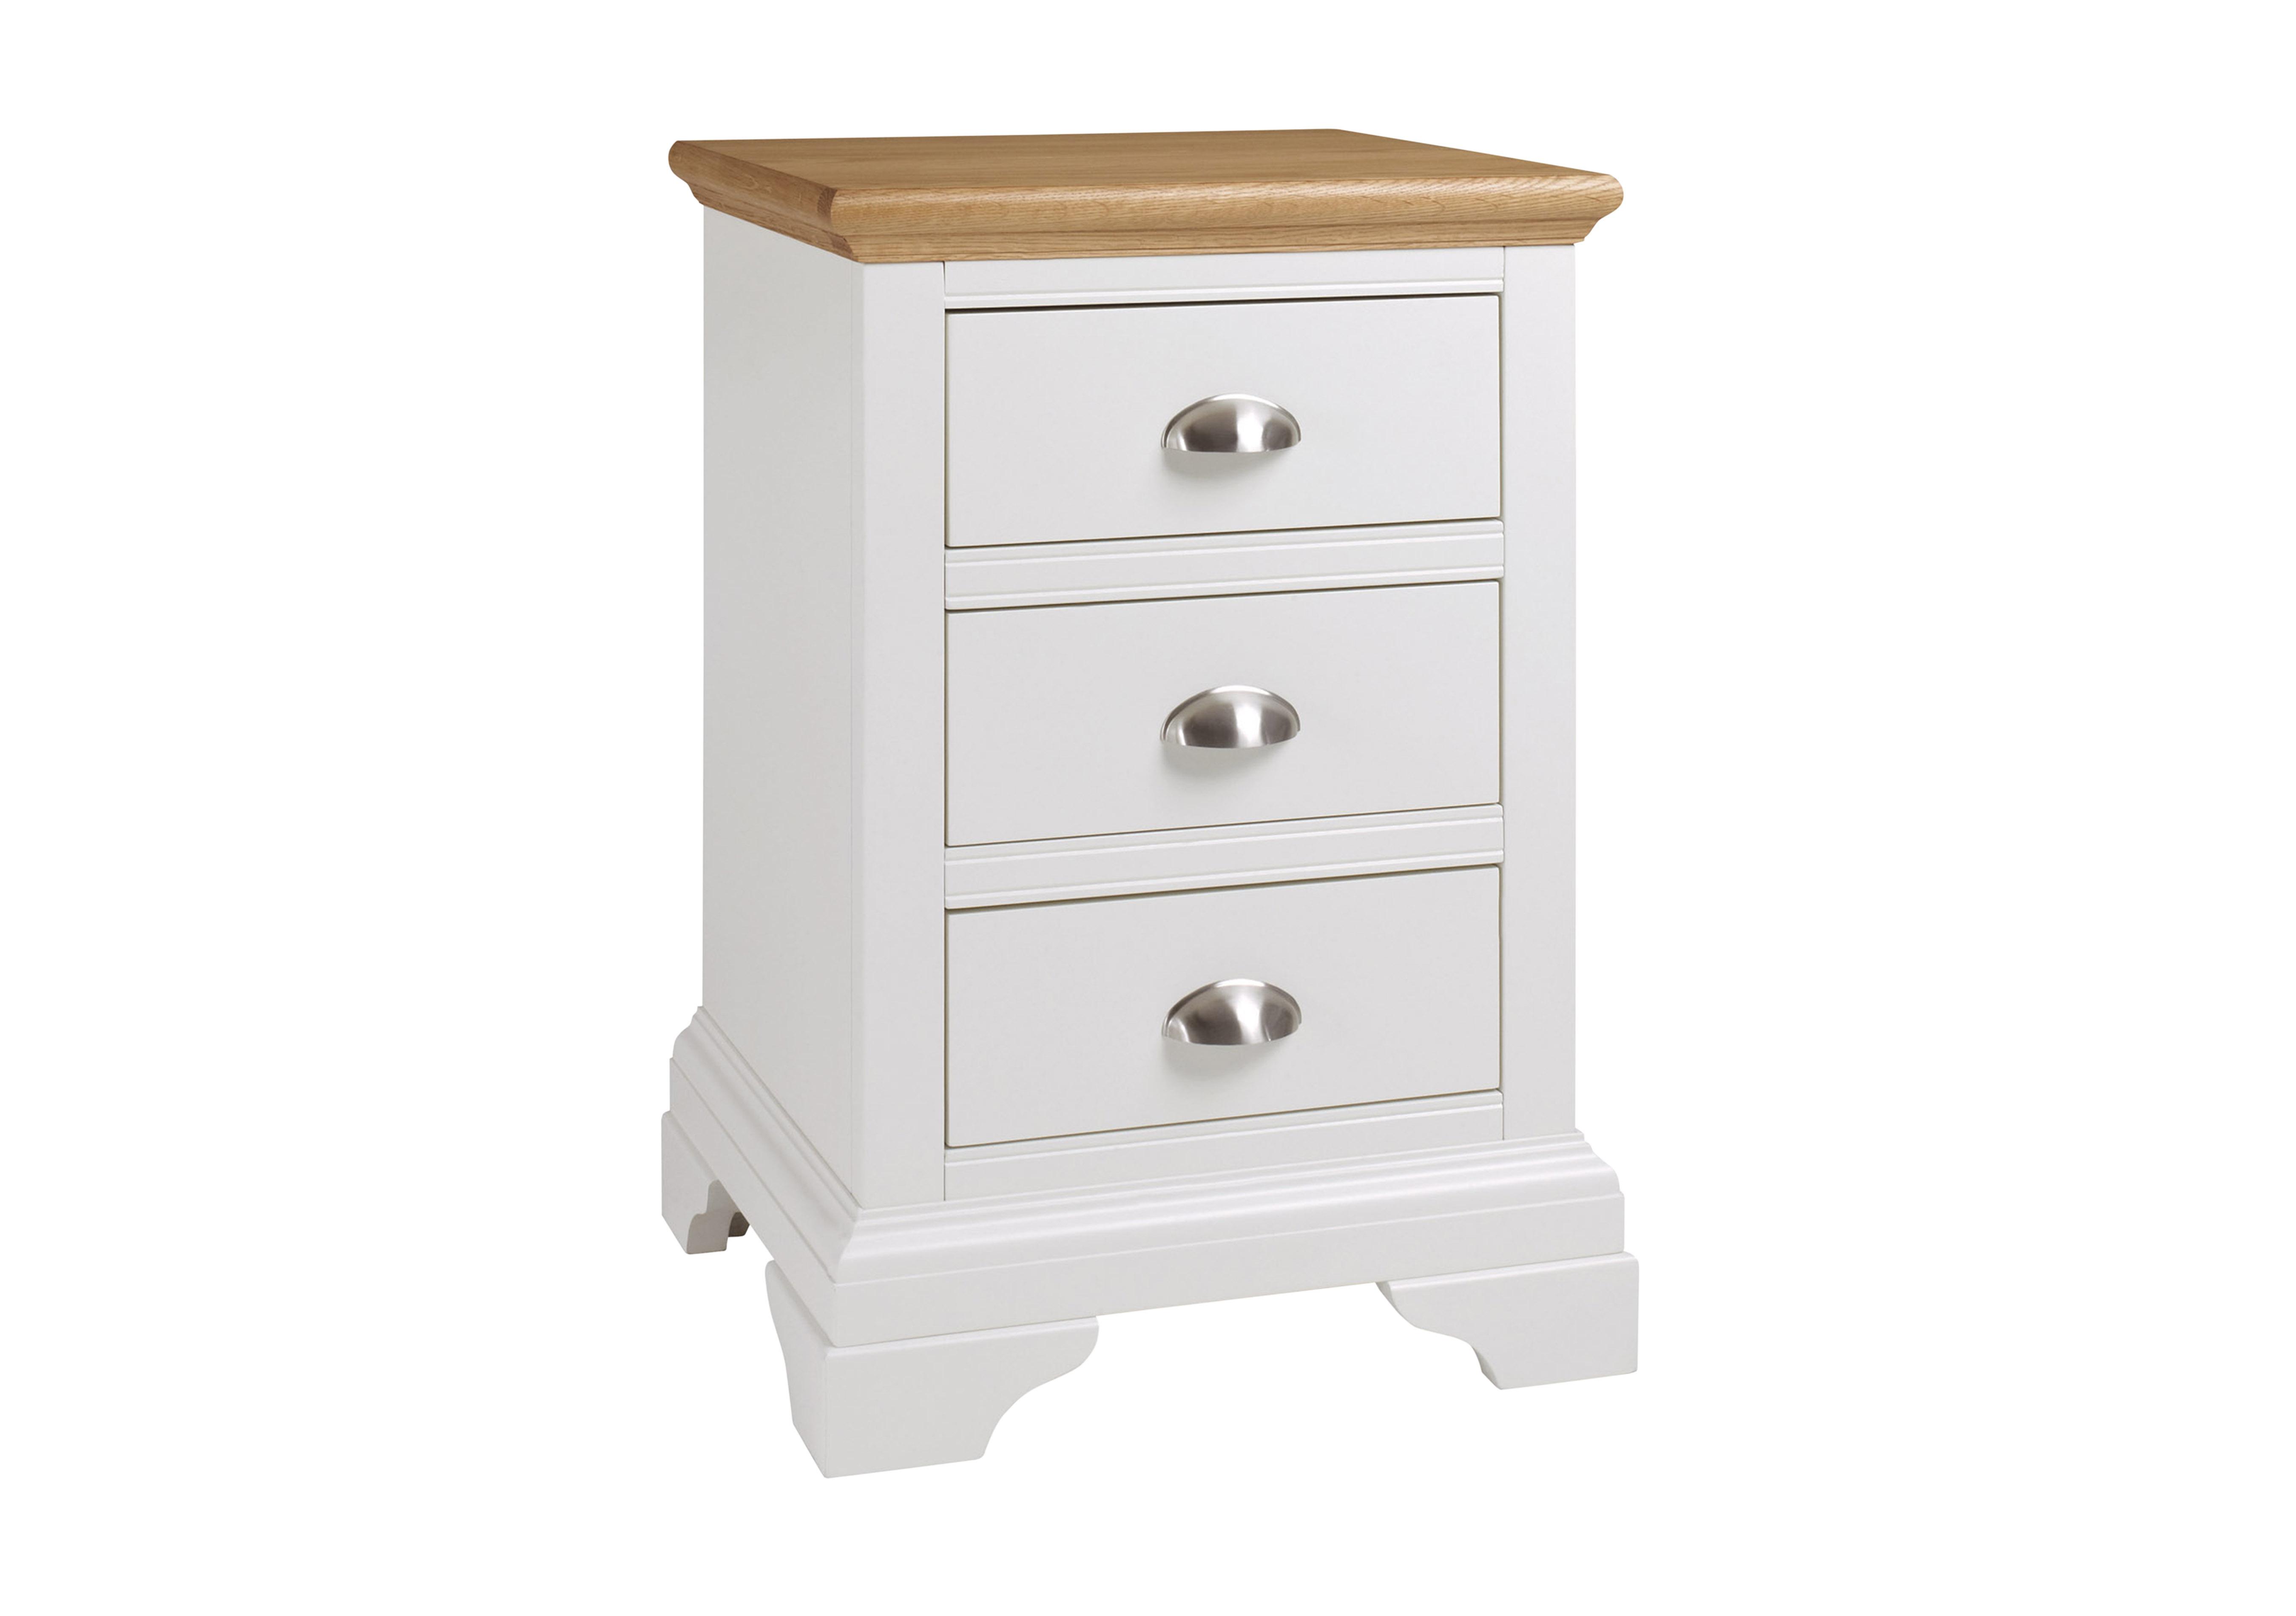 Emily 3 Drawer Bedside Chest in Ivory And Oak on Furniture Village